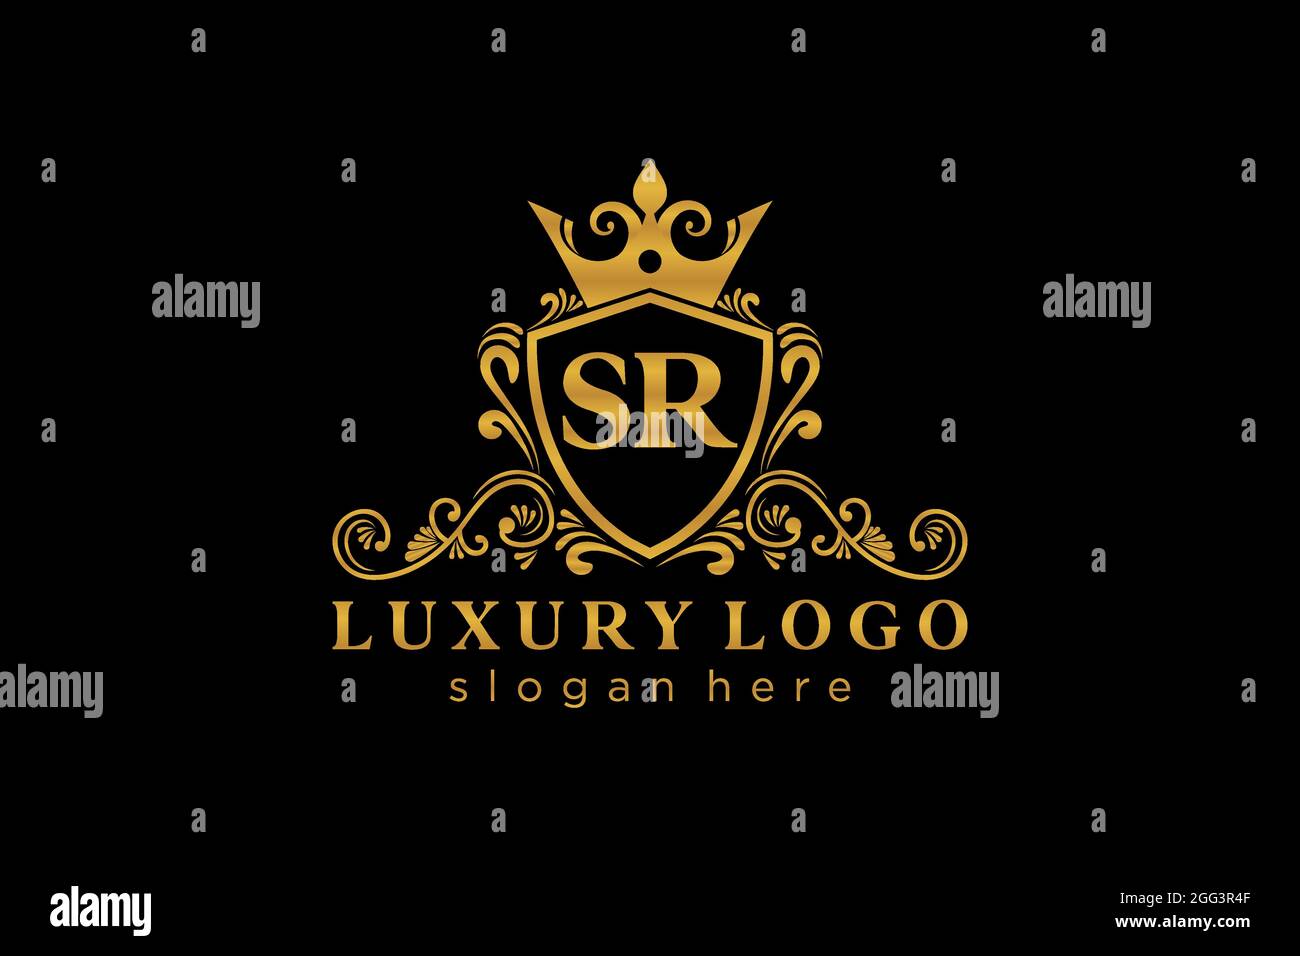 SR Letter Royal Luxury Logo template in vector art for Restaurant, Royalty, Boutique, Cafe, Hotel, Heraldic, Jewelry, Fashion and other vector illustr Stock Vector